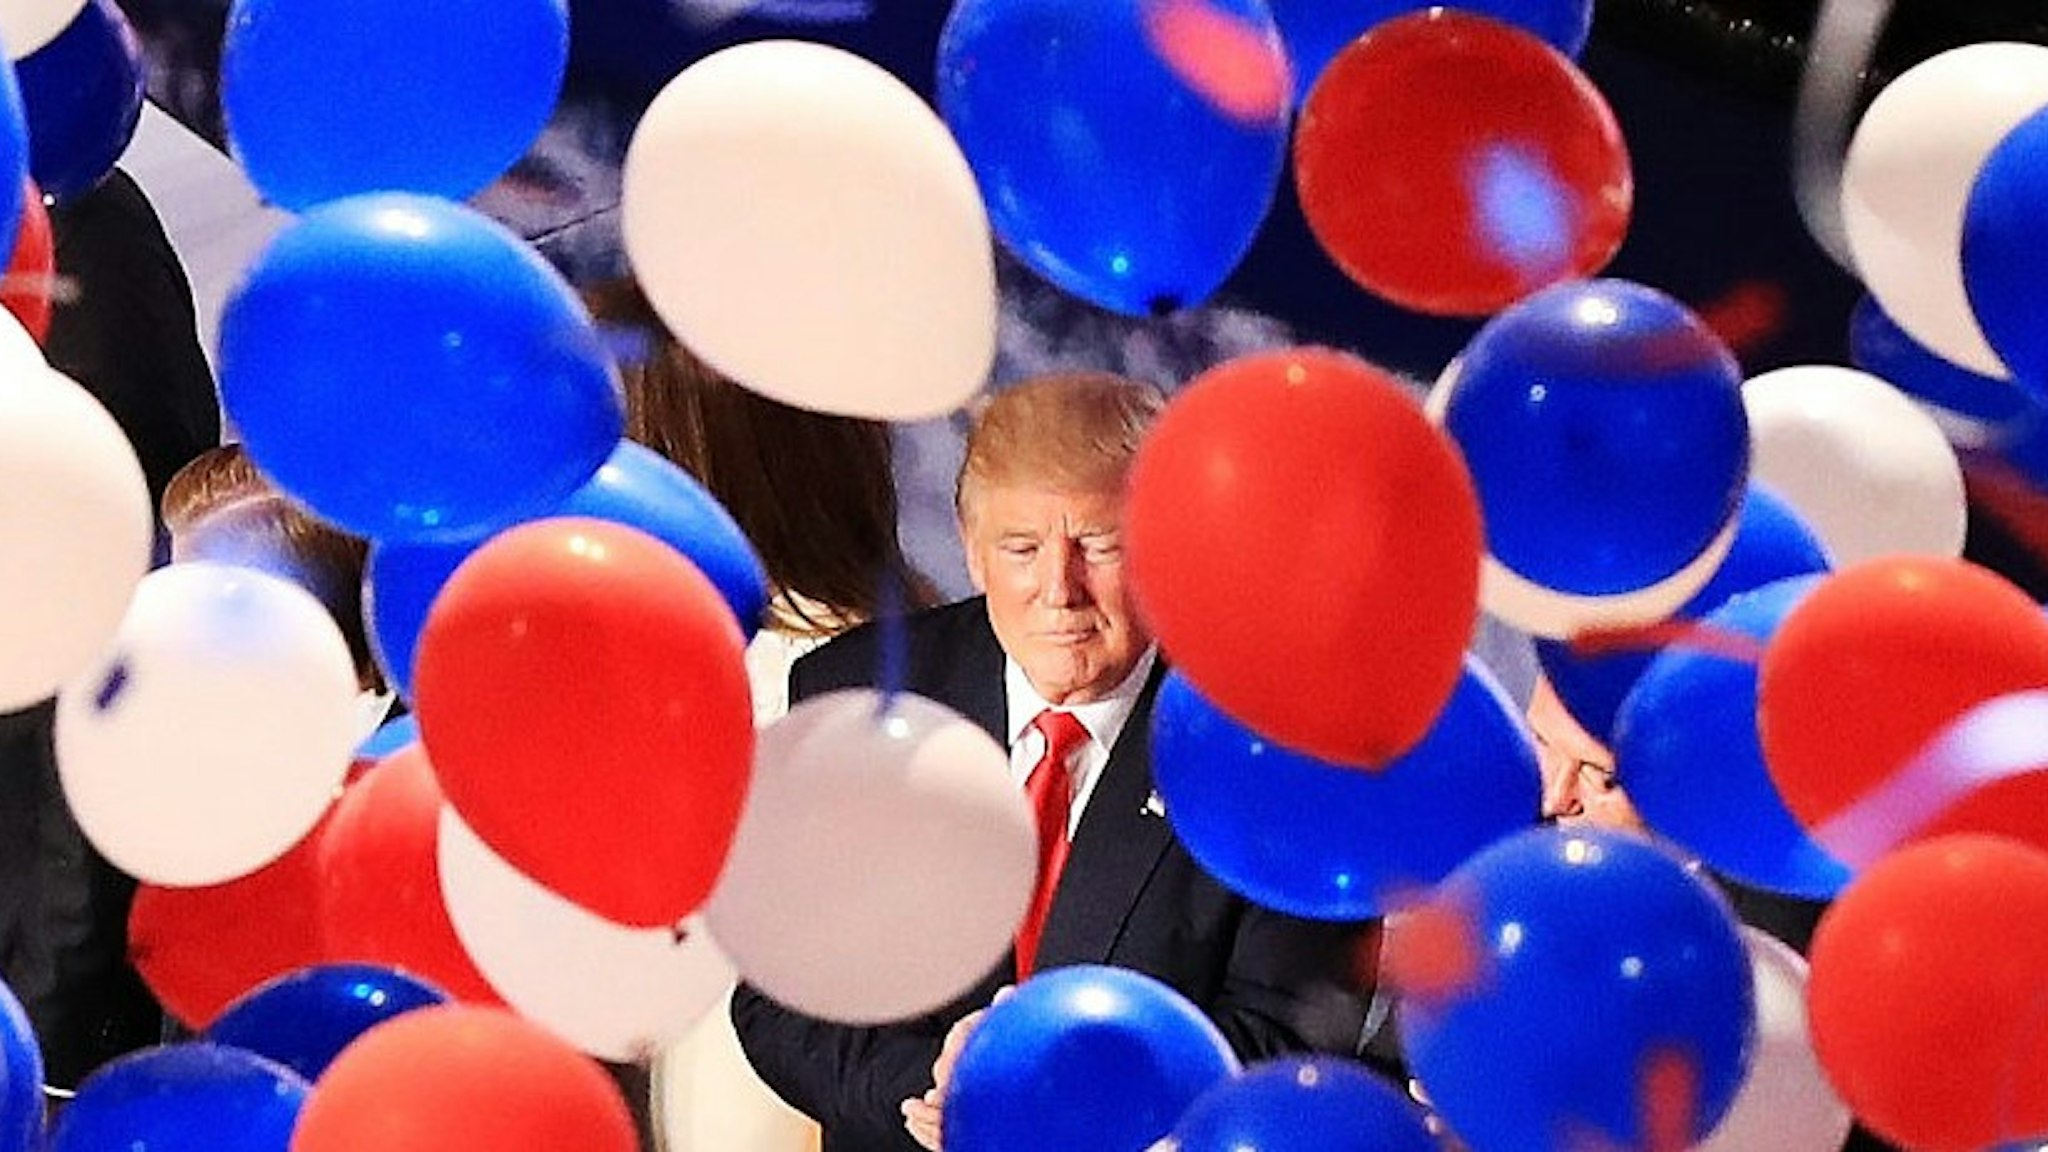 CLEVELAND, OH - JULY 21: Republican presidential candidate Donald Trump and his family acknowledge the crowd as balloons fall on the fourth day of the Republican National Convention on July 21, 2016 at the Quicken Loans Arena in Cleveland, Ohio. Republican presidential candidate Donald Trump received the number of votes needed to secure the party's nomination. An estimated 50,000 people are expected in Cleveland, including hundreds of protesters and members of the media. The four-day Republican National Convention kicked off on July 18. (Photo by